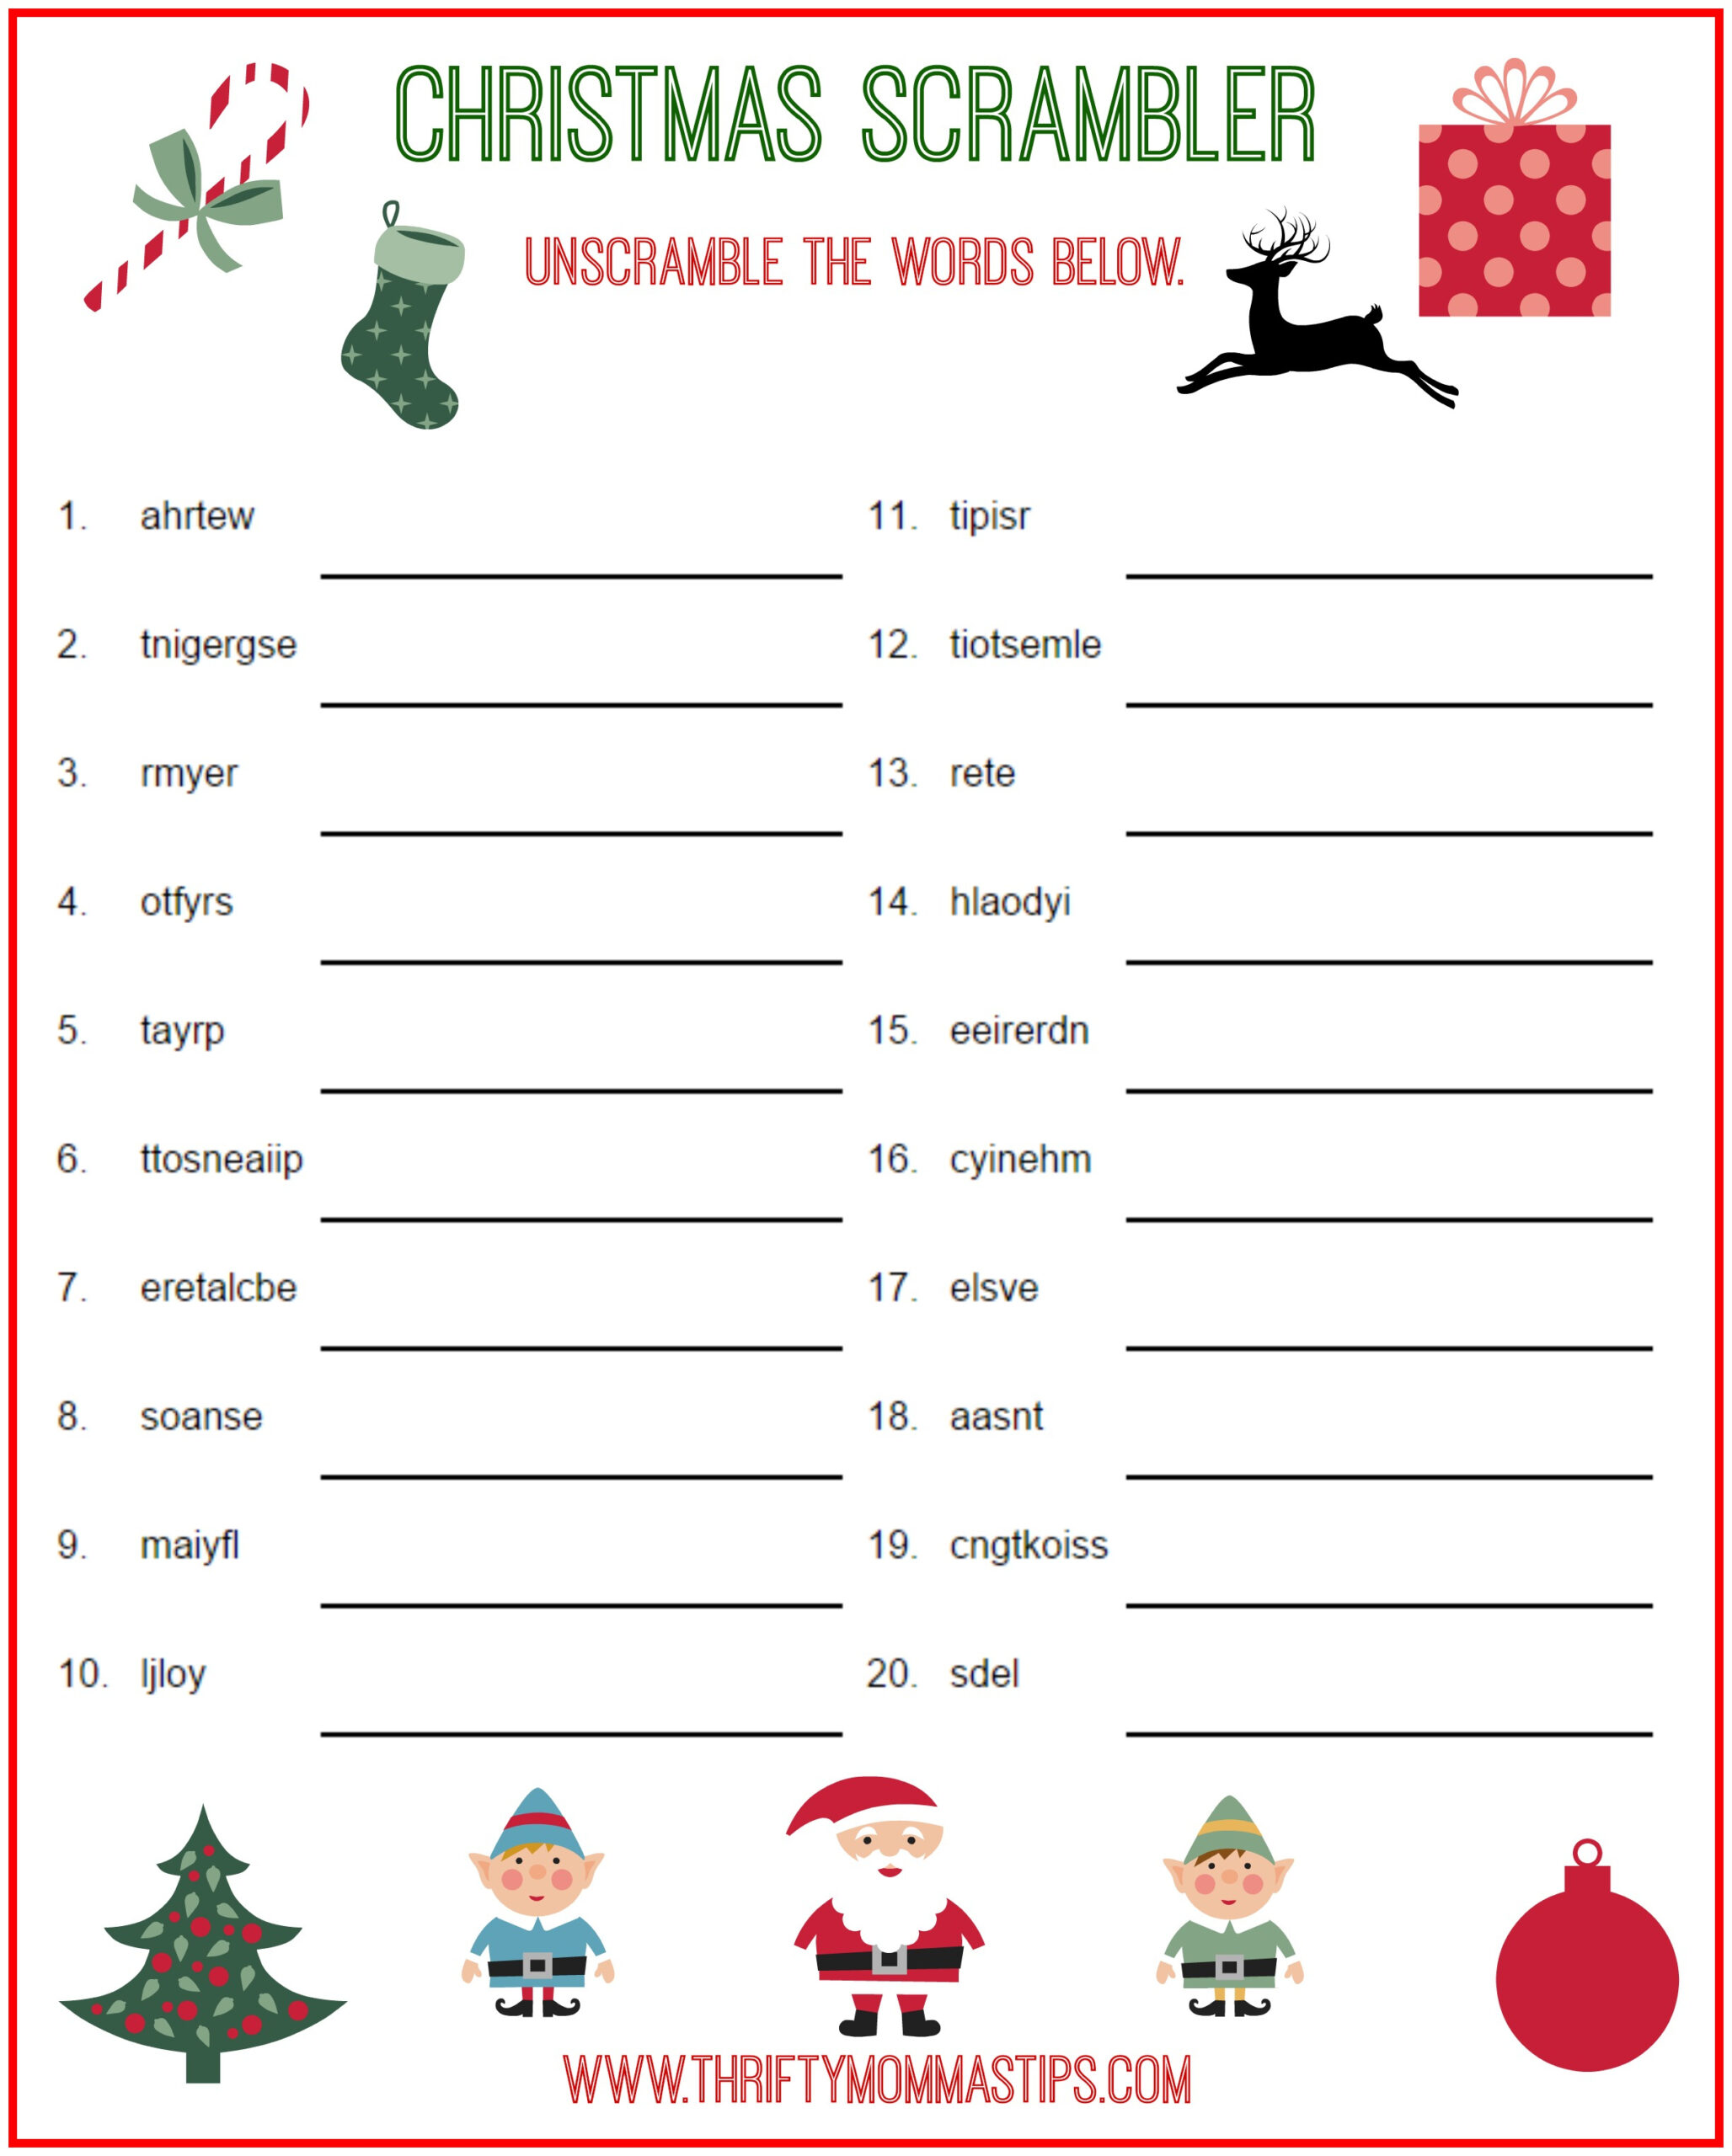 Christmas Scrambler Free Word Game Puzzle - Thrifty Mommas Tips - Free Printable Holiday Word Games